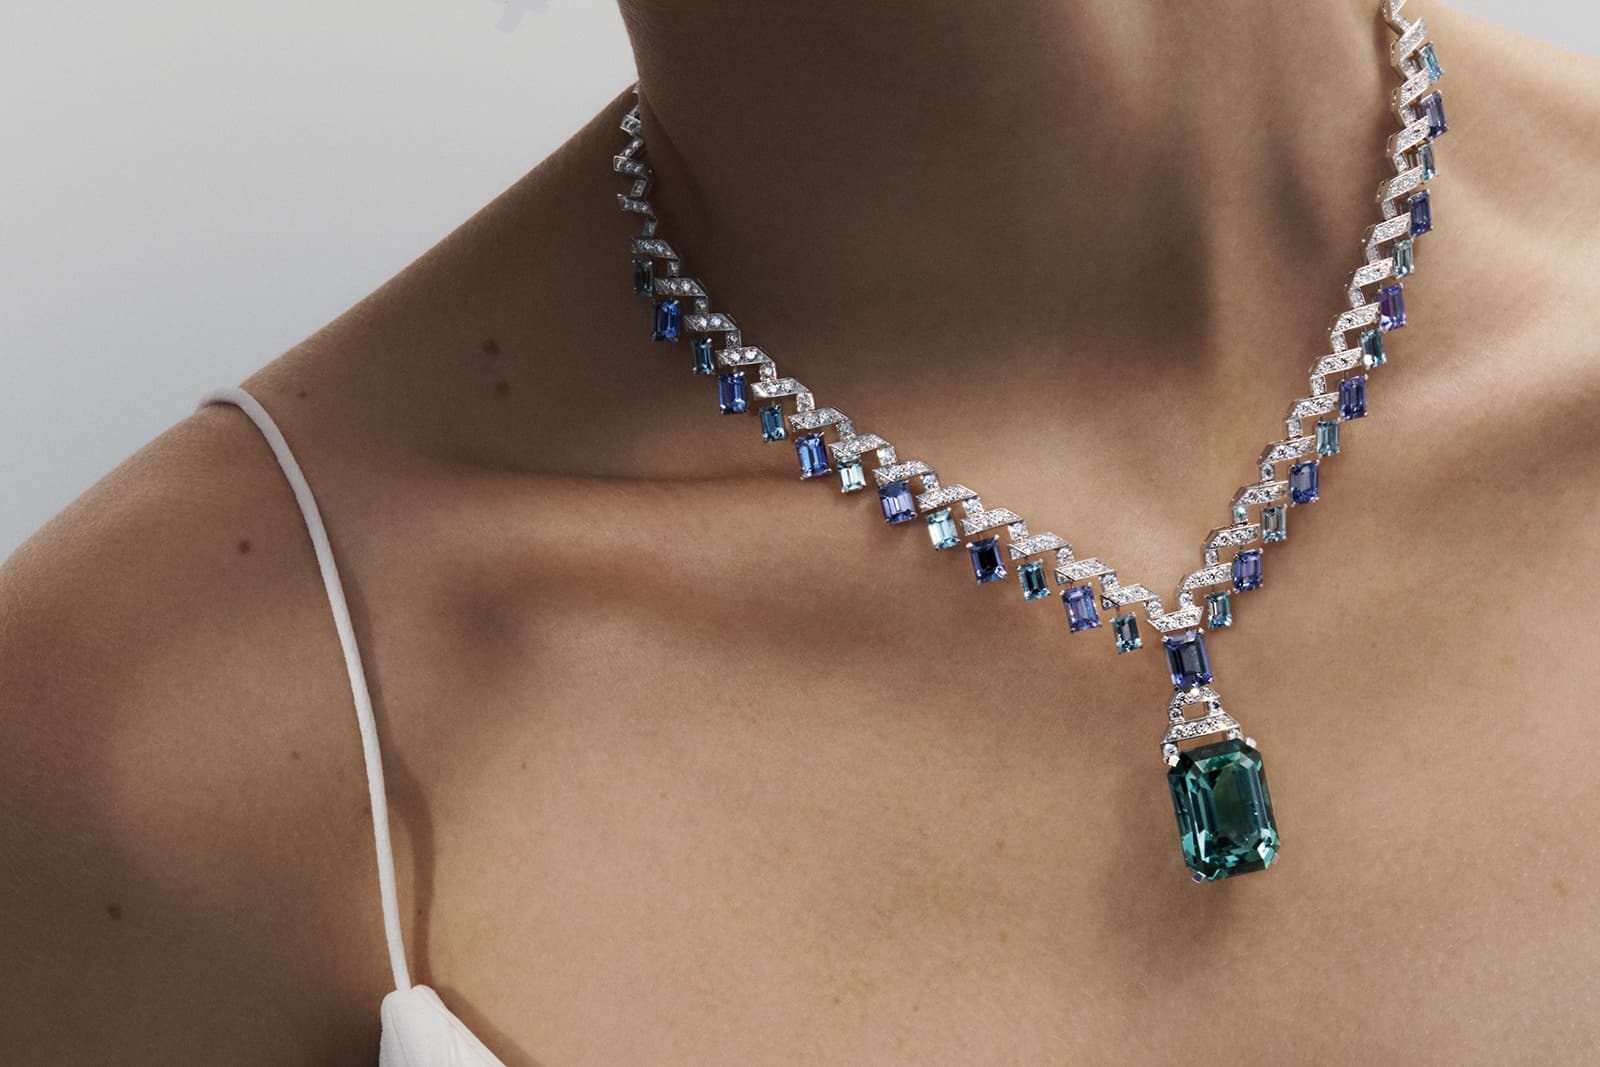 Louis Vuitton high jewellery collection Bravery  The Australian